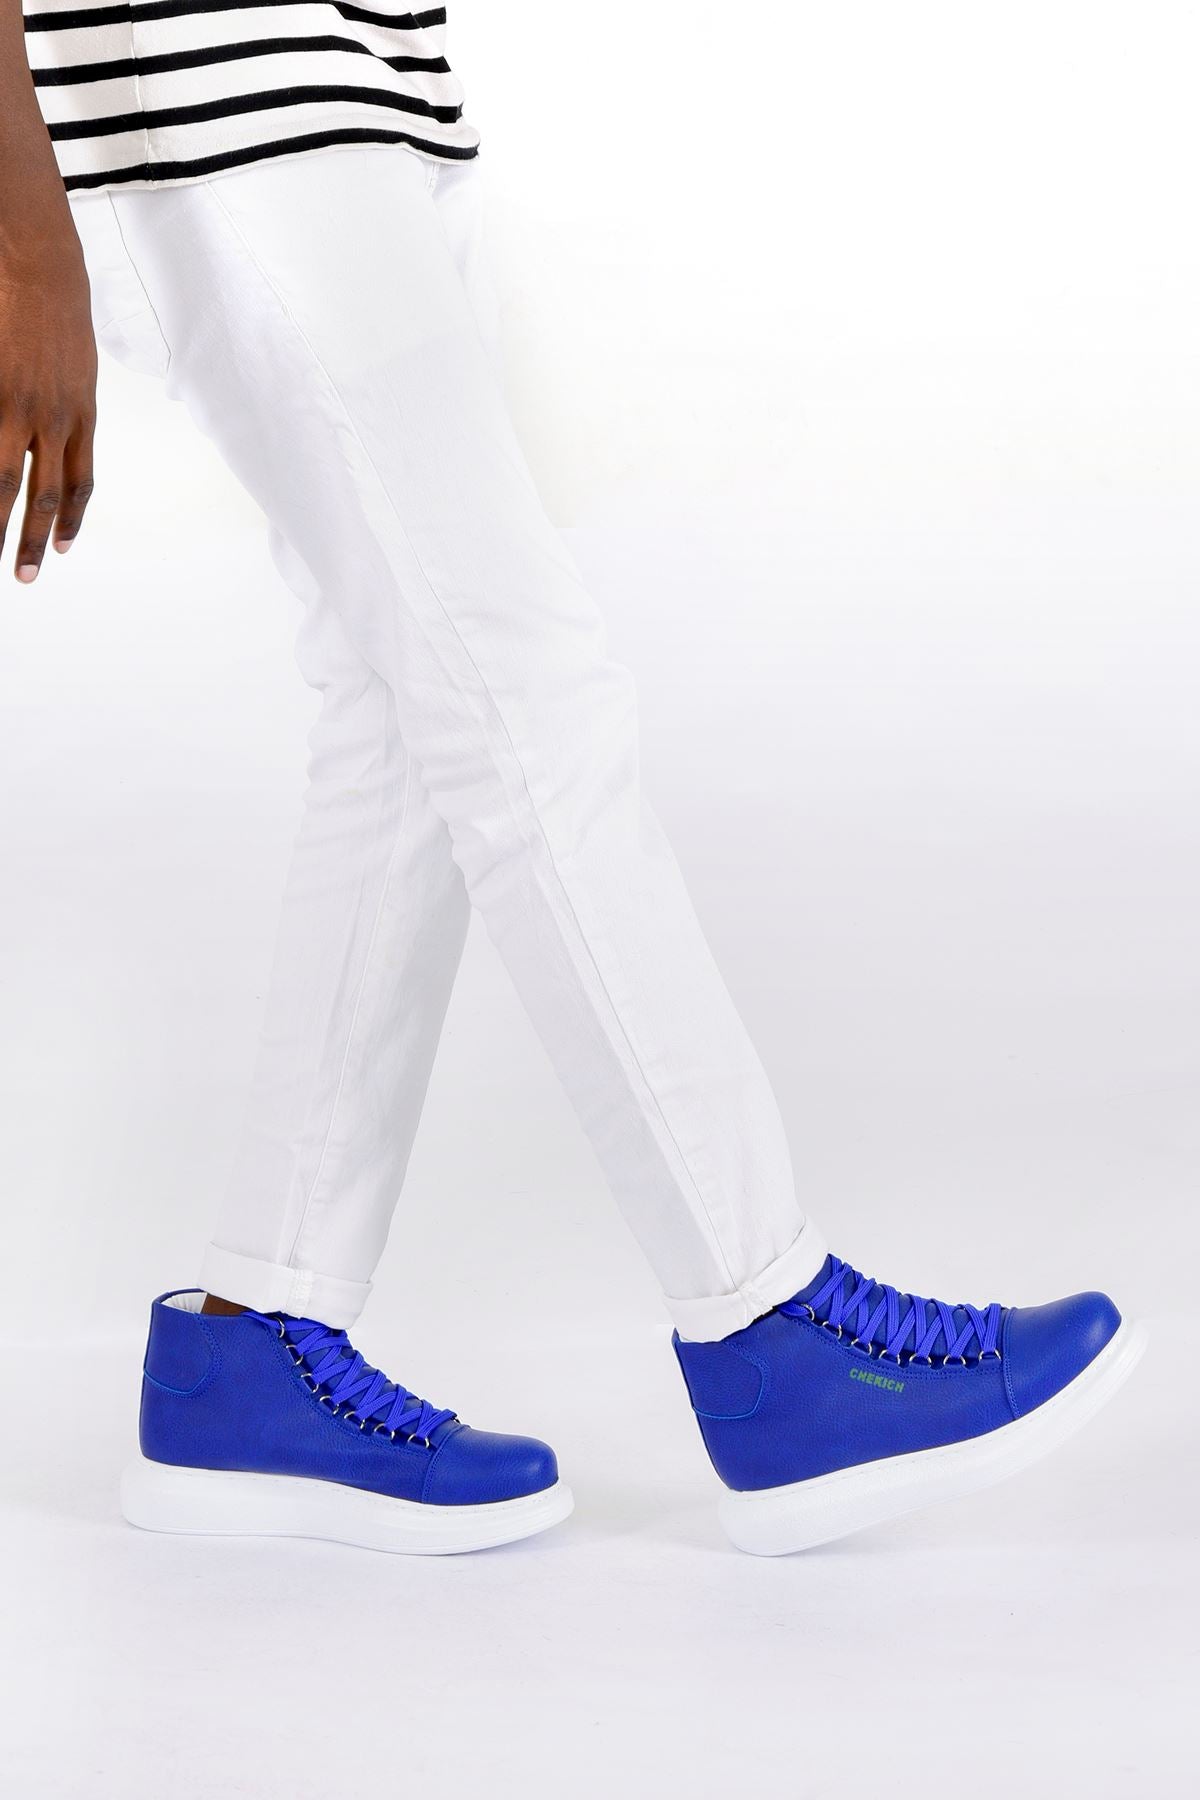 CH258 Roma Men's Boots Sax Blue - STREETMODE™